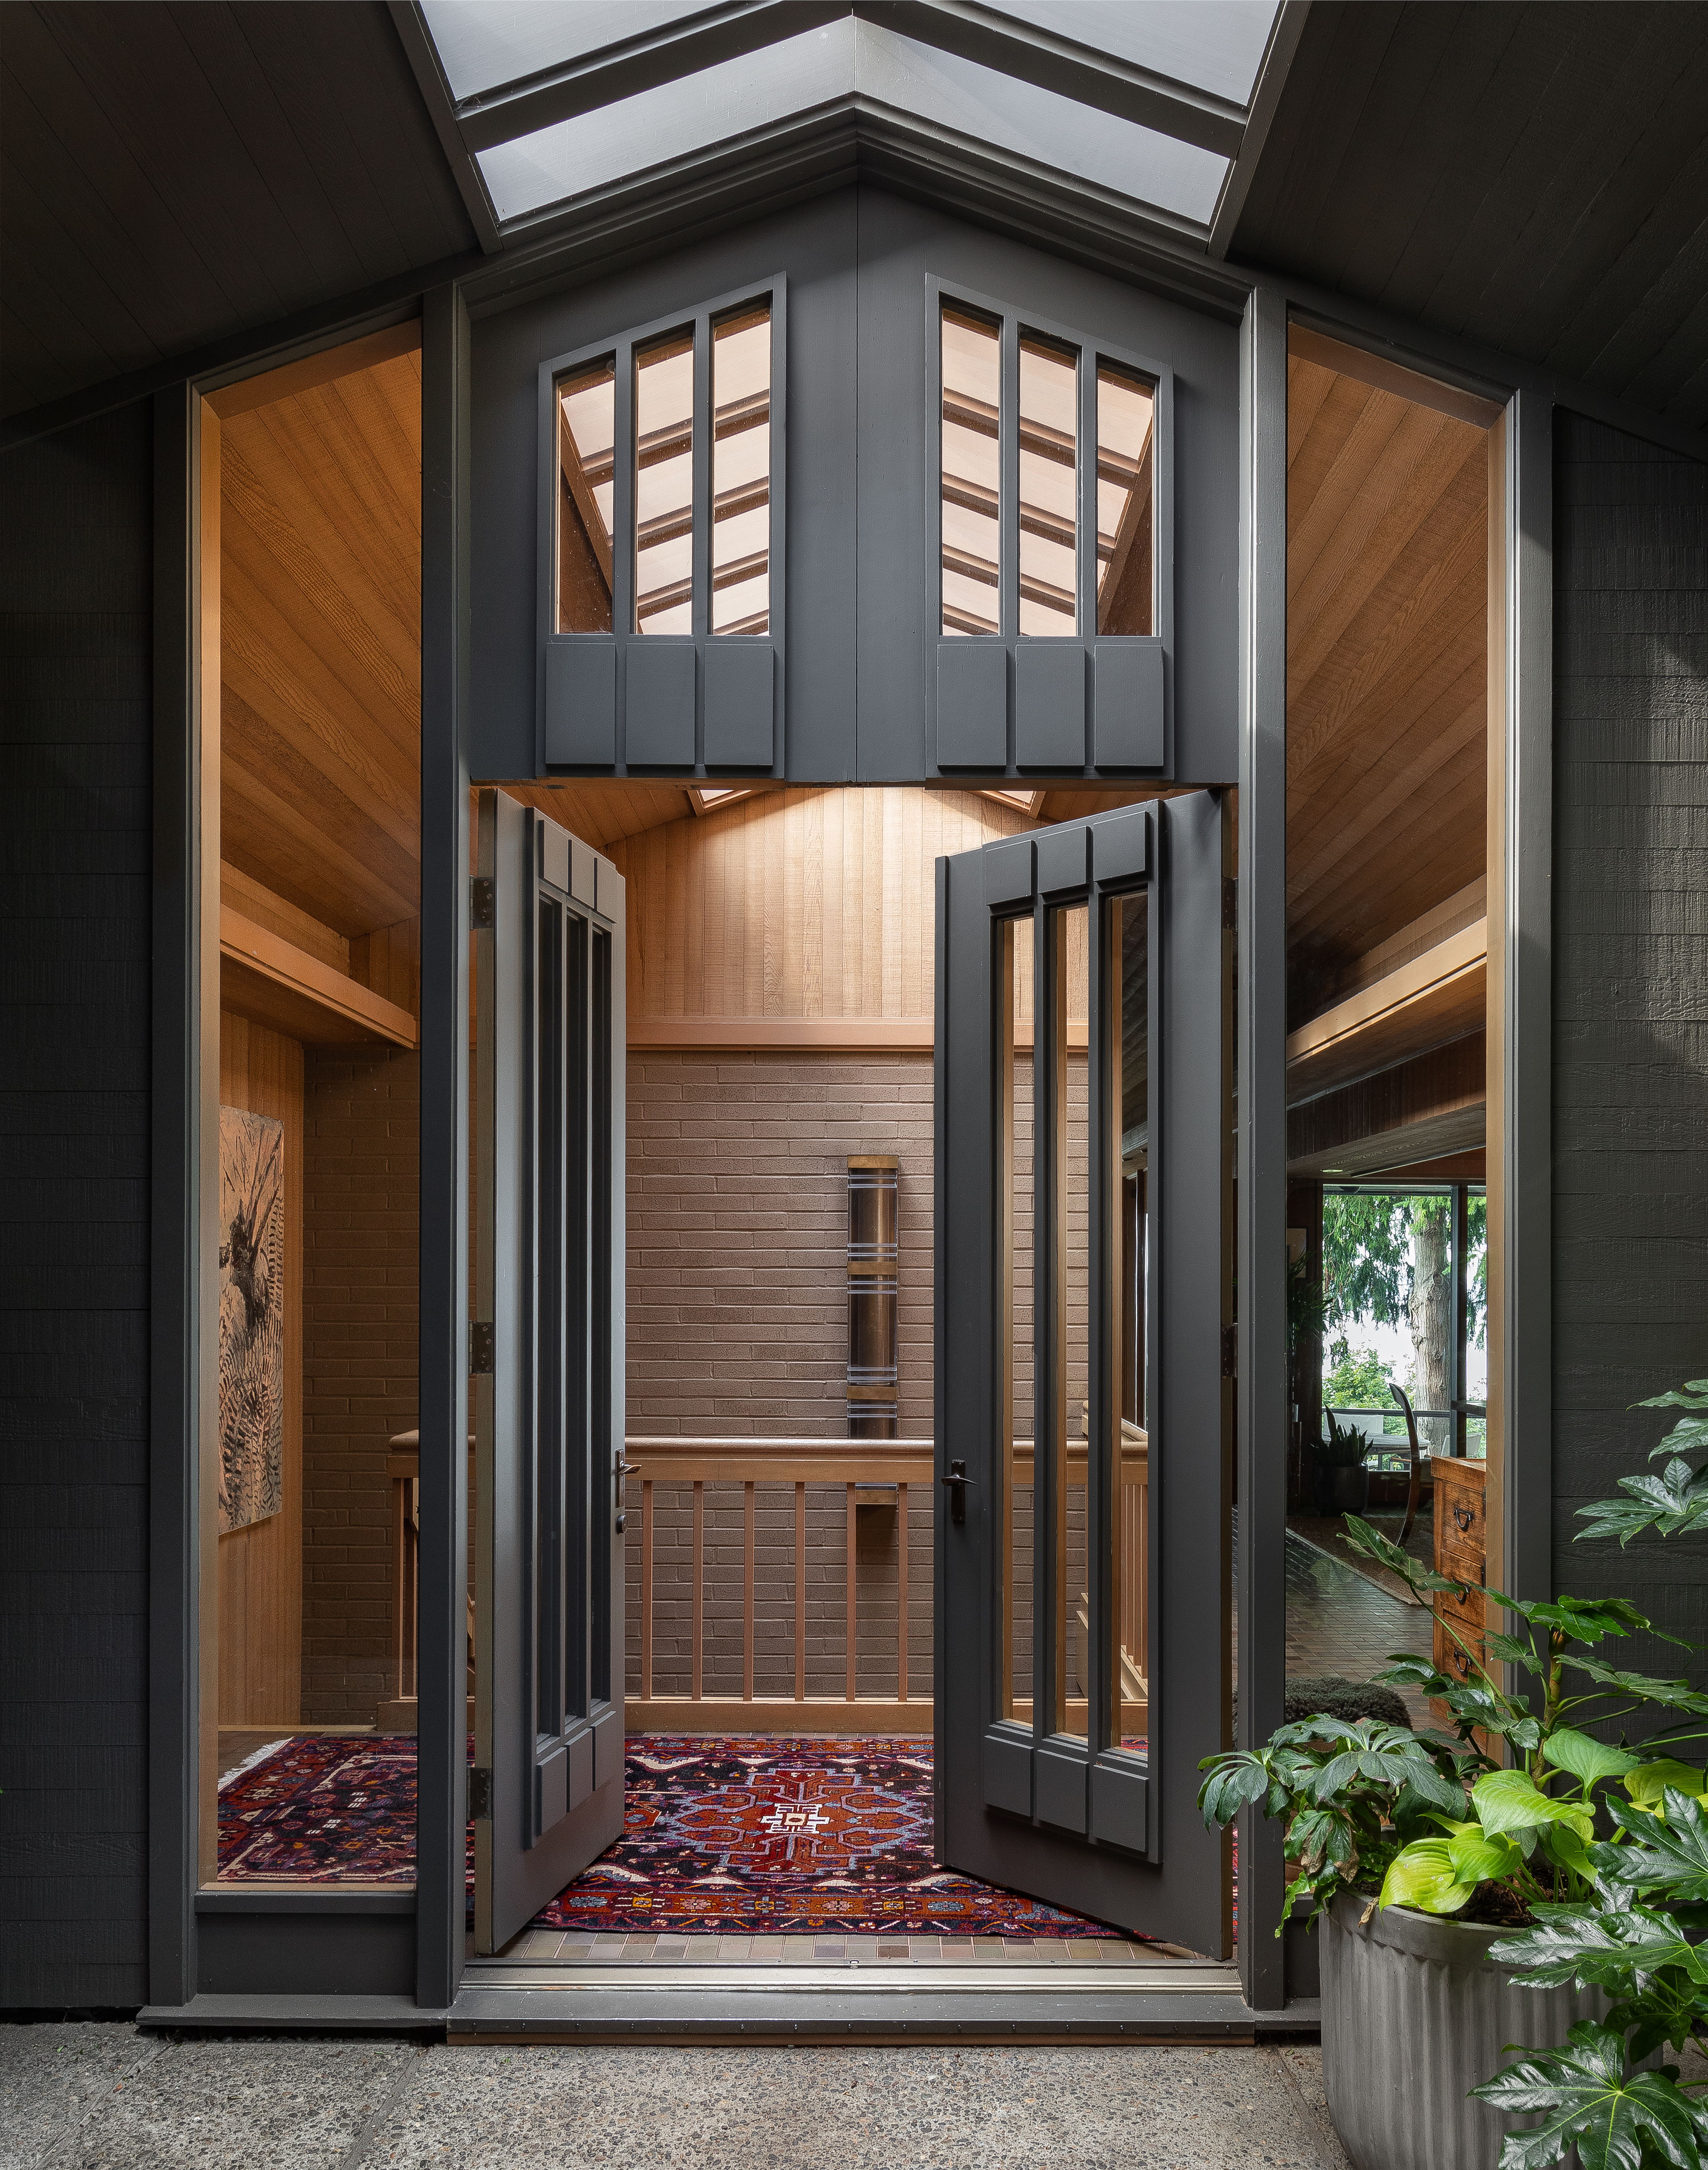 The front entry makes a bold statement with its tall, impressive design, featuring expansive glass windows that flood the space with natural light.